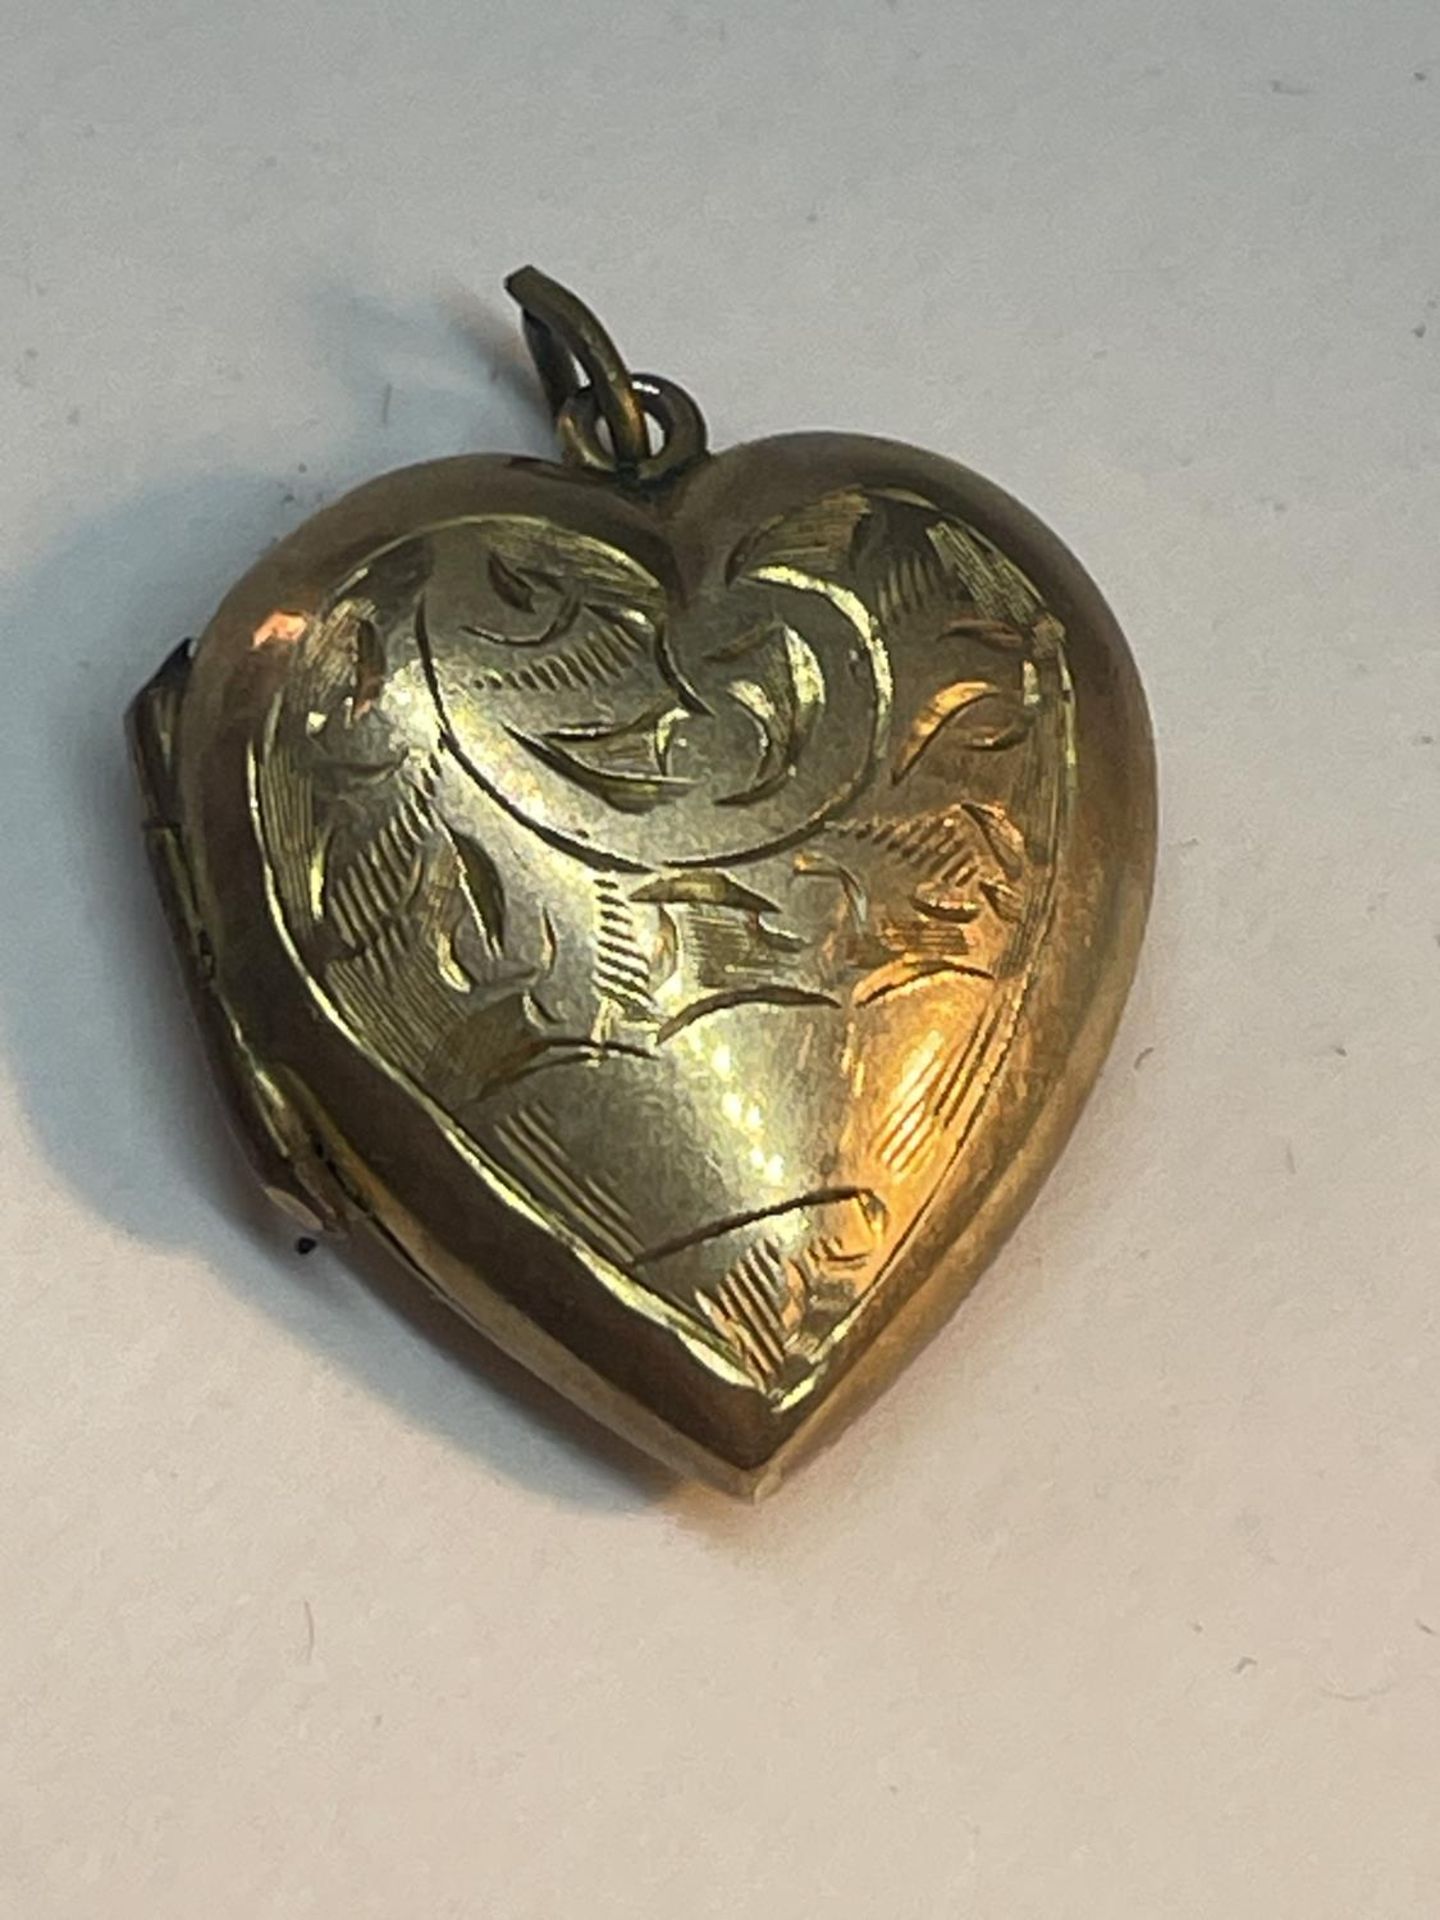 A 9 CARAT GOLD HEART LOCKET WITH VINTAGE PHOTOGRAPHS GROSS WEIGHT 3.28 GRAMS